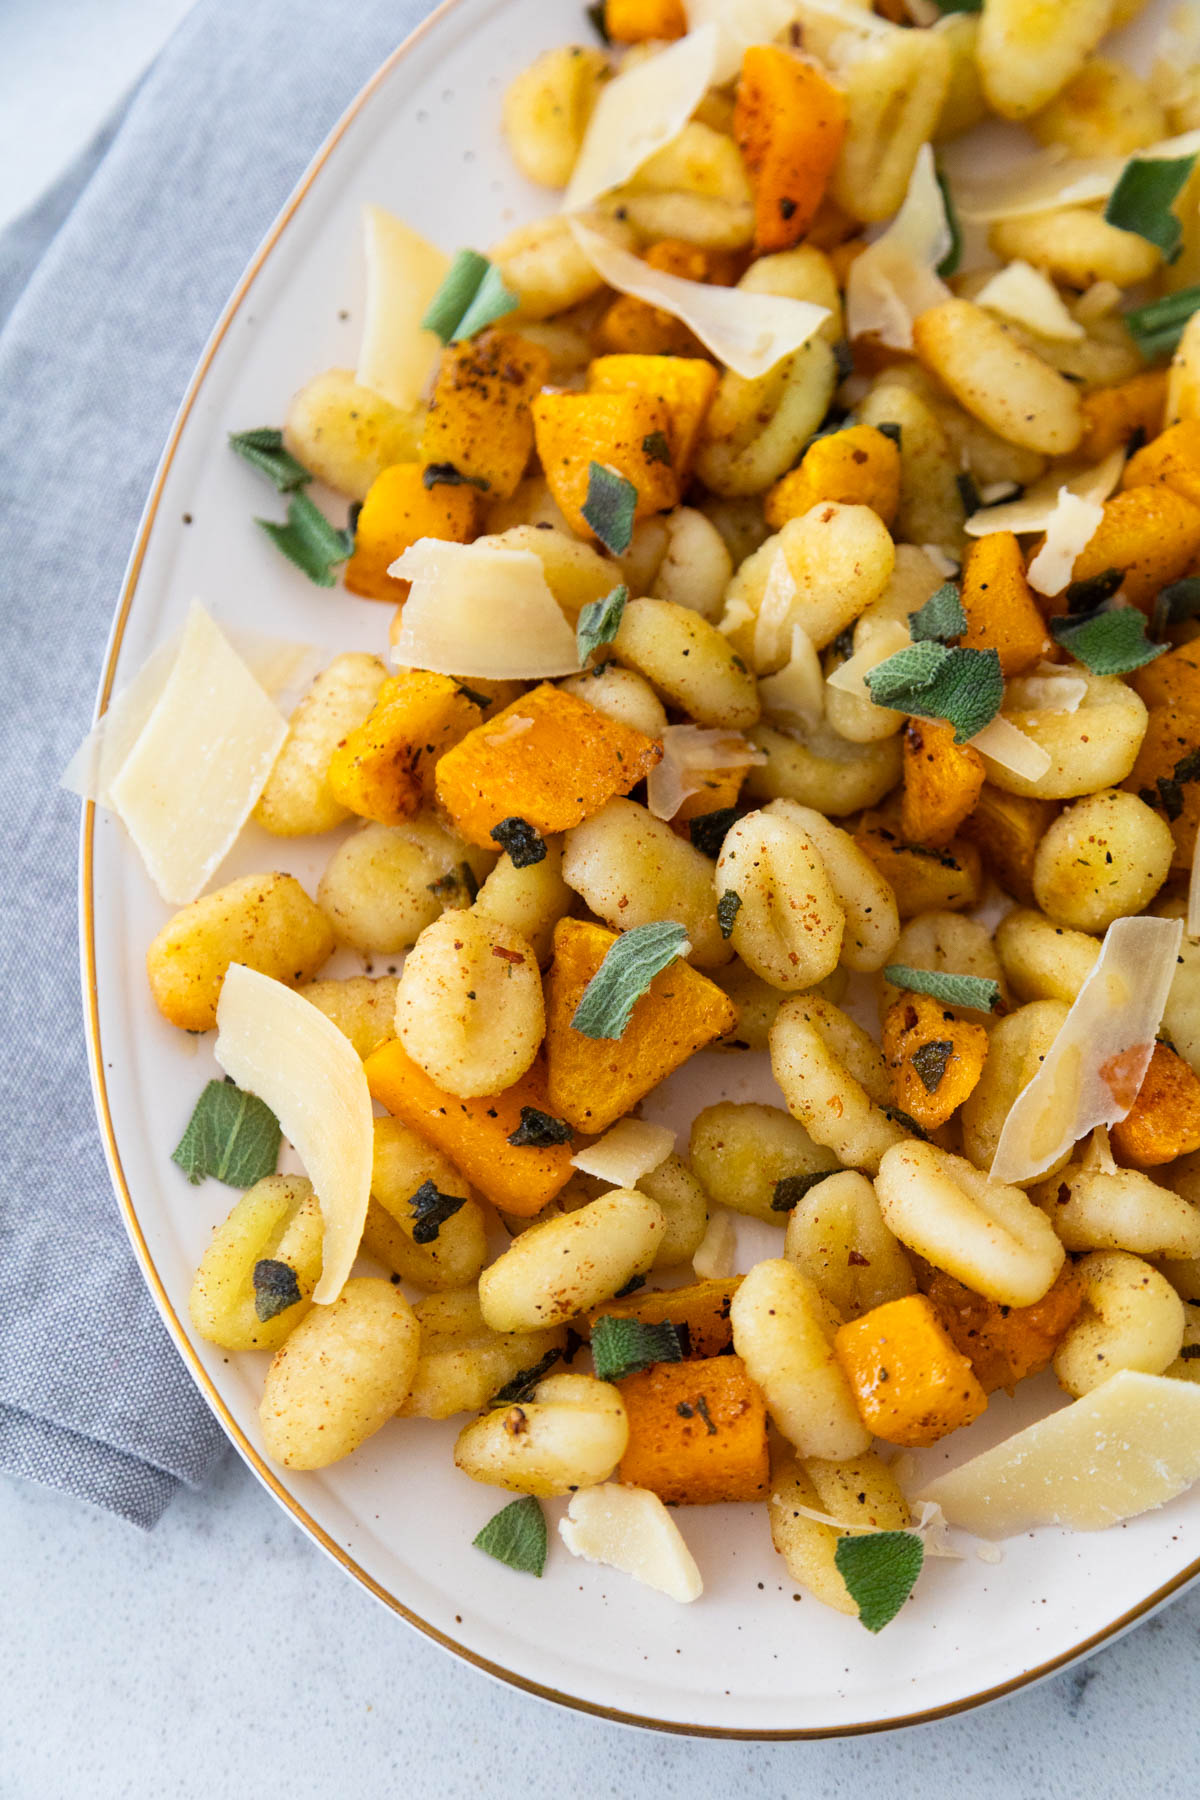 A platter is filled with roasted gnocchi and butternut squash with parmesan shavings and fresh sage leaves ripped and sprinkled over the top.